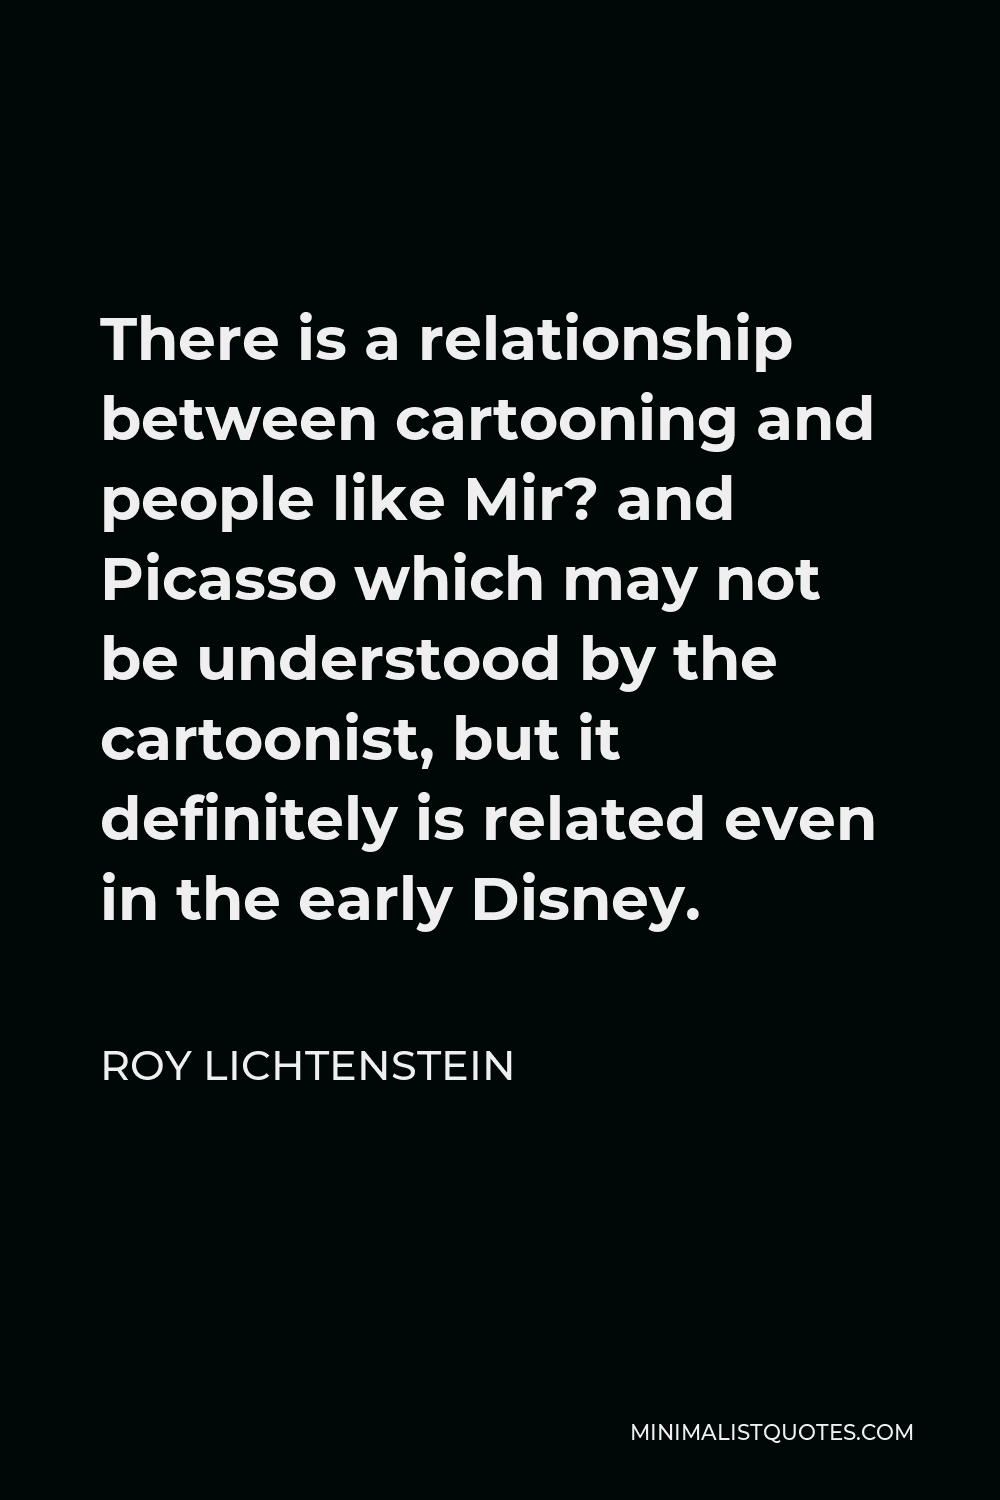 Roy Lichtenstein Quote - There is a relationship between cartooning and people like Mir? and Picasso which may not be understood by the cartoonist, but it definitely is related even in the early Disney.